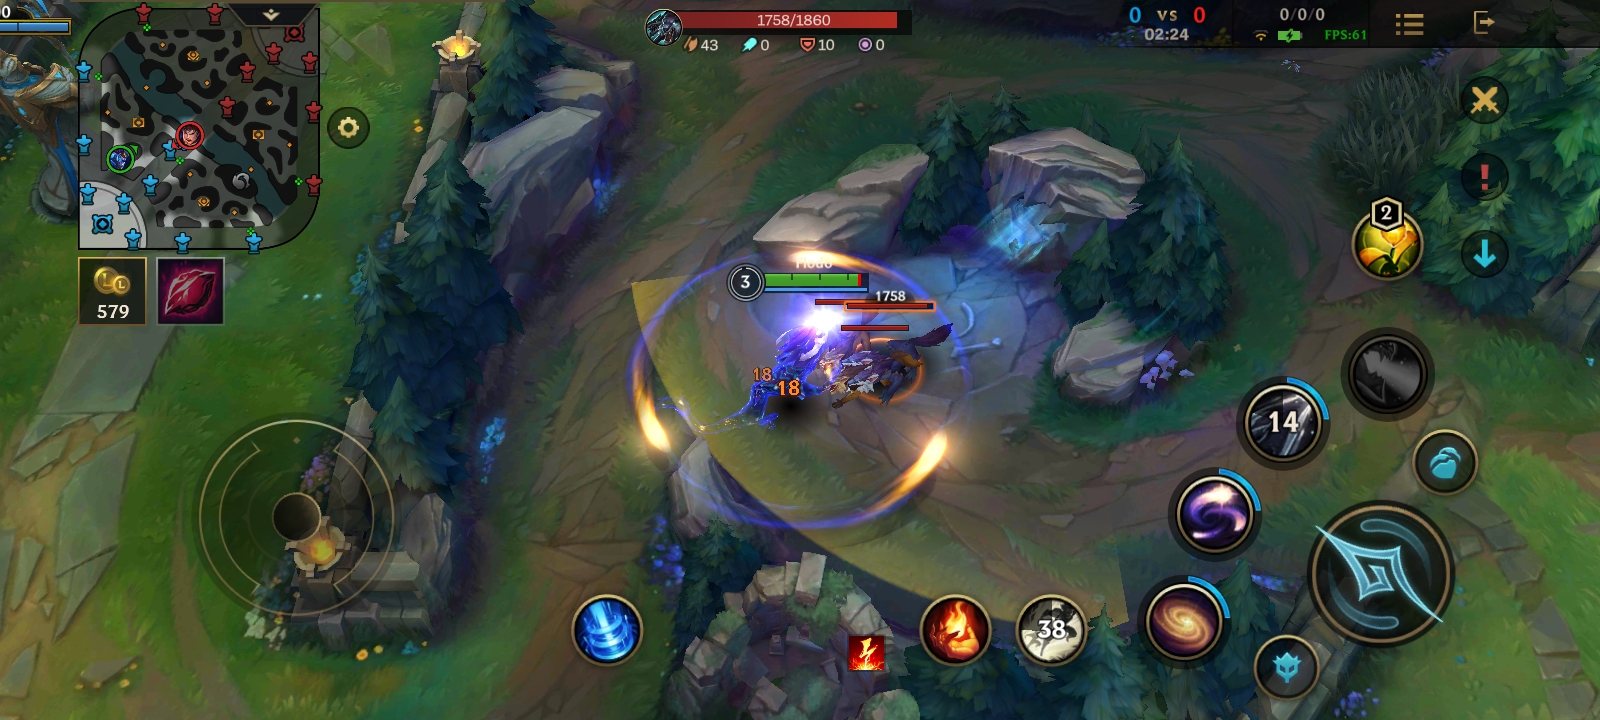 League of Legends: Wild Rift is a mobile version of the popular PC MOBA  releasing for iOS and Android in 2020